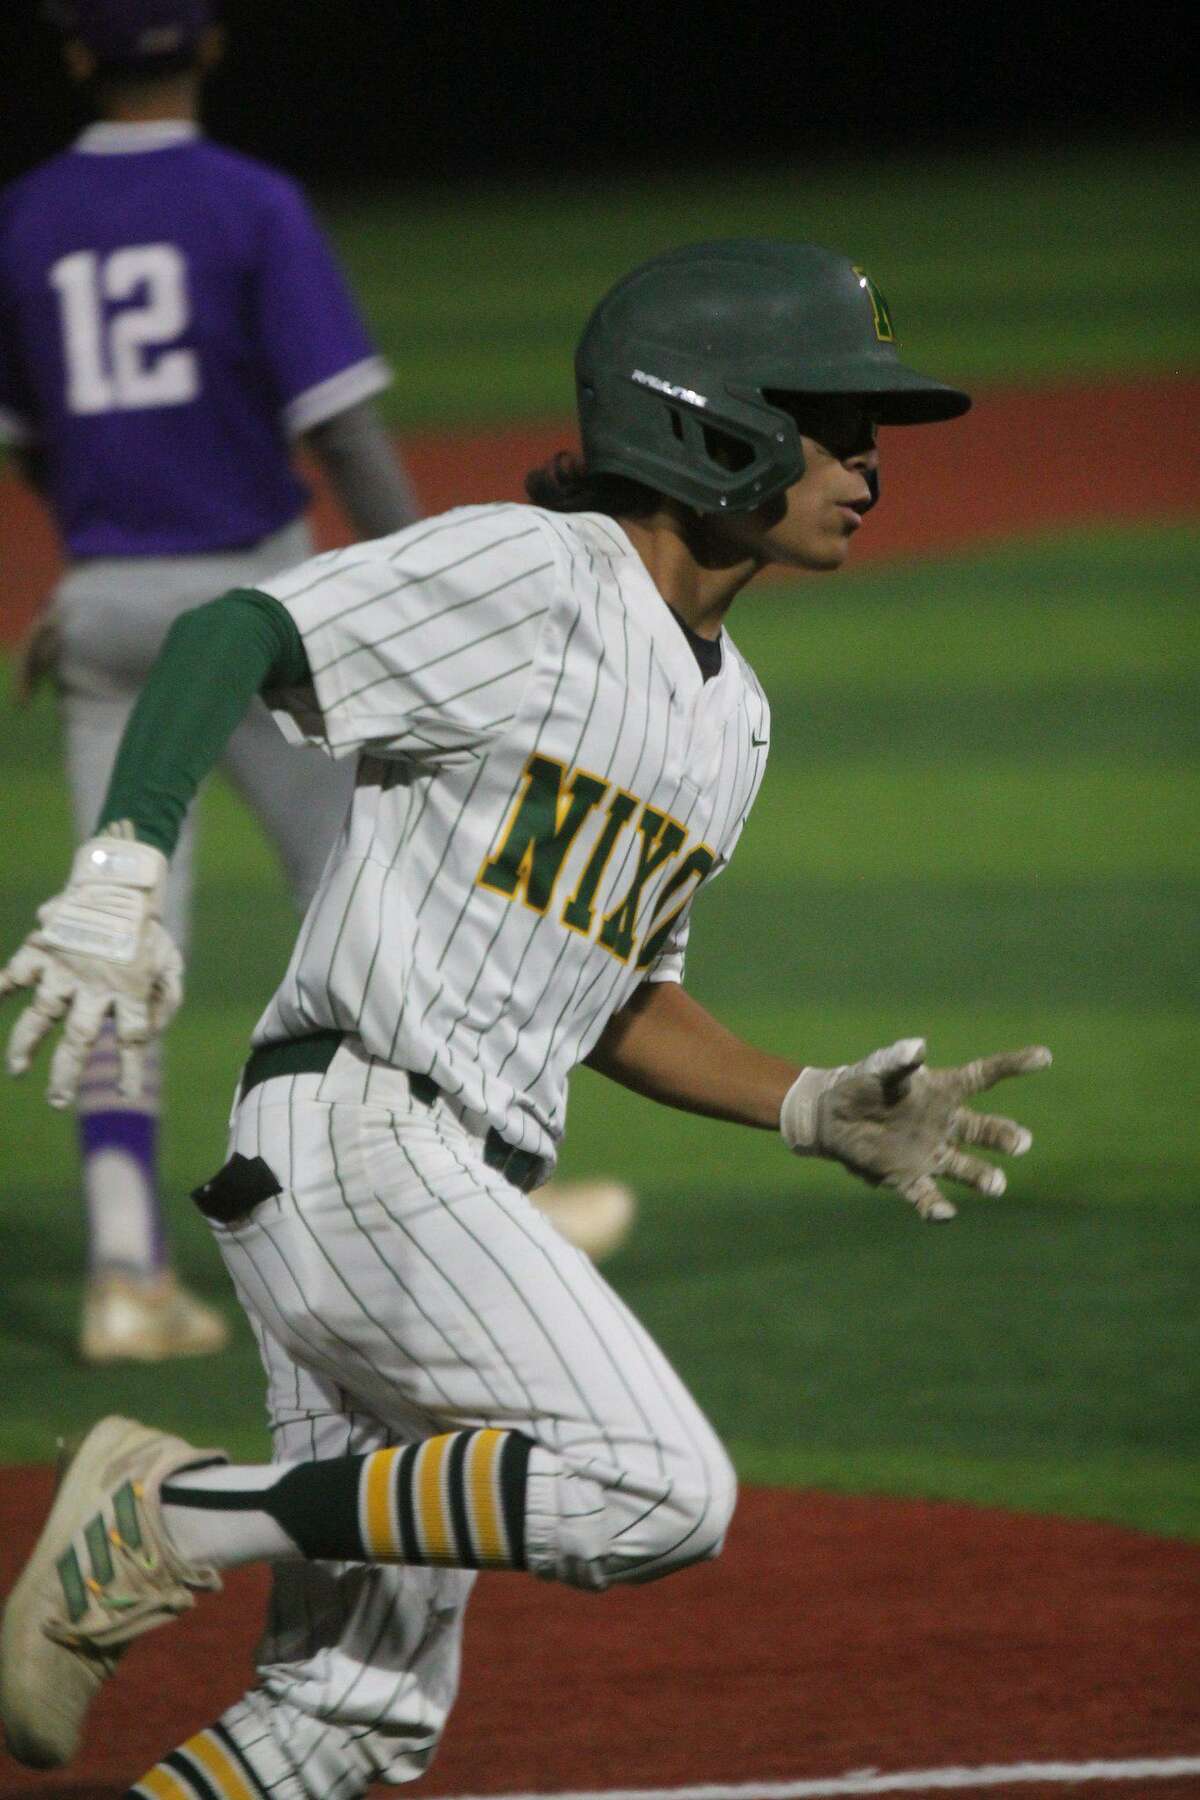 The Nixon Mustangs beat the LBJ Wolves 10-1 on Friday to claim their second straight district win.